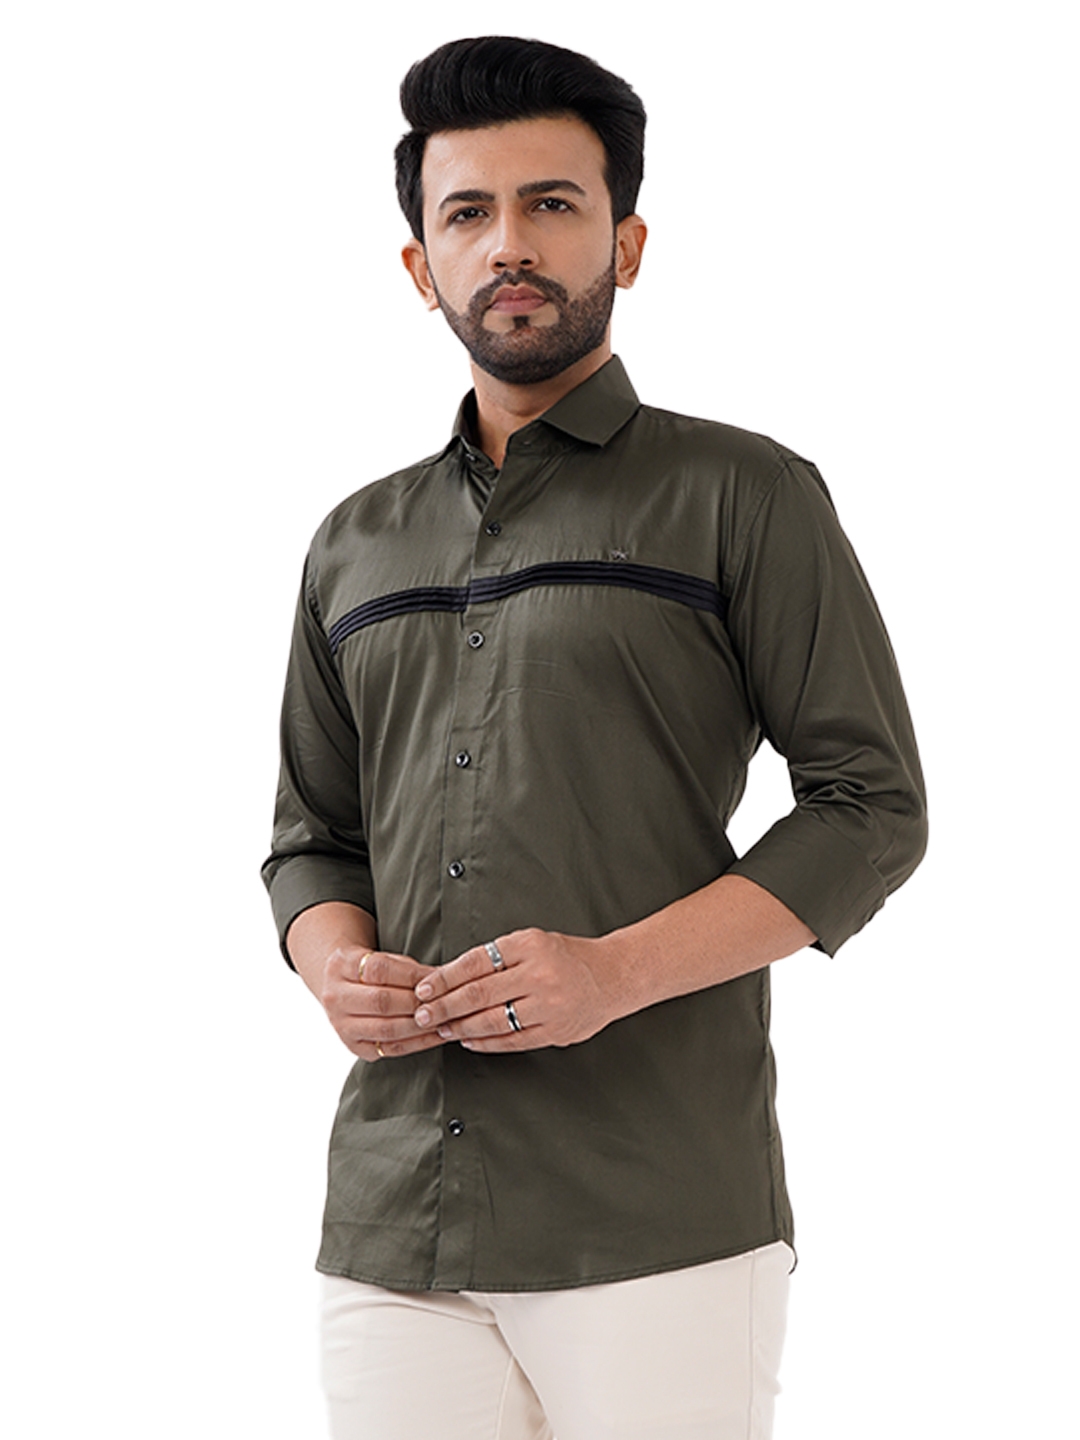 D'cot by Donear | D'cot by Donear Men's Green Cotton Casual Shirts 2